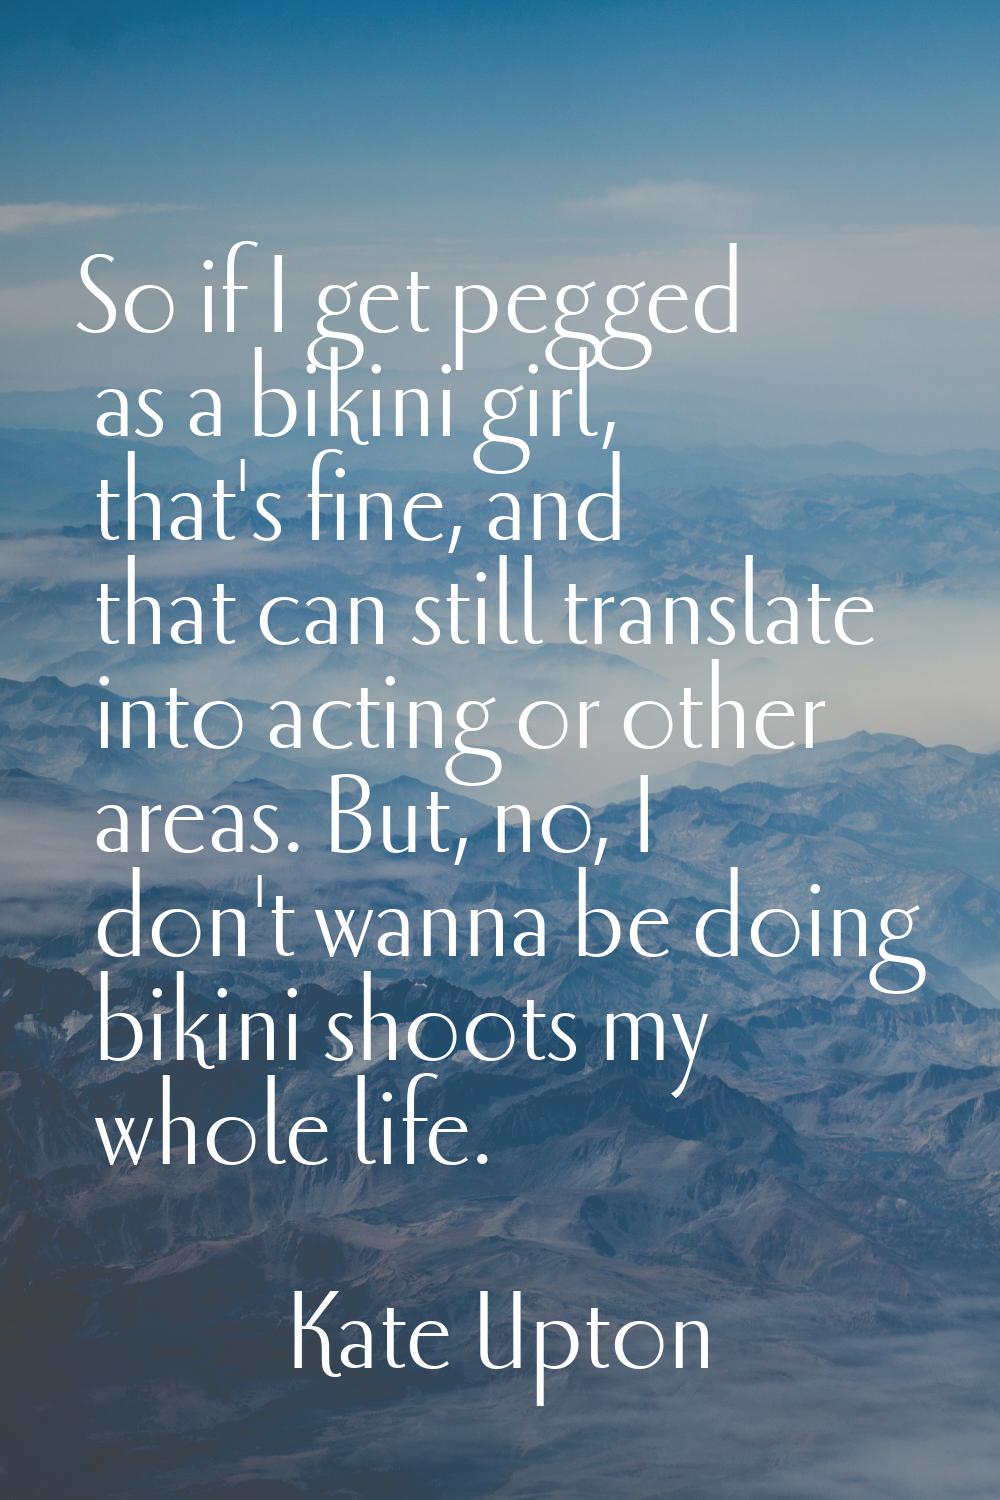 So if I get pegged as a bikini girl, that's fine, and that can still translate into acting or other